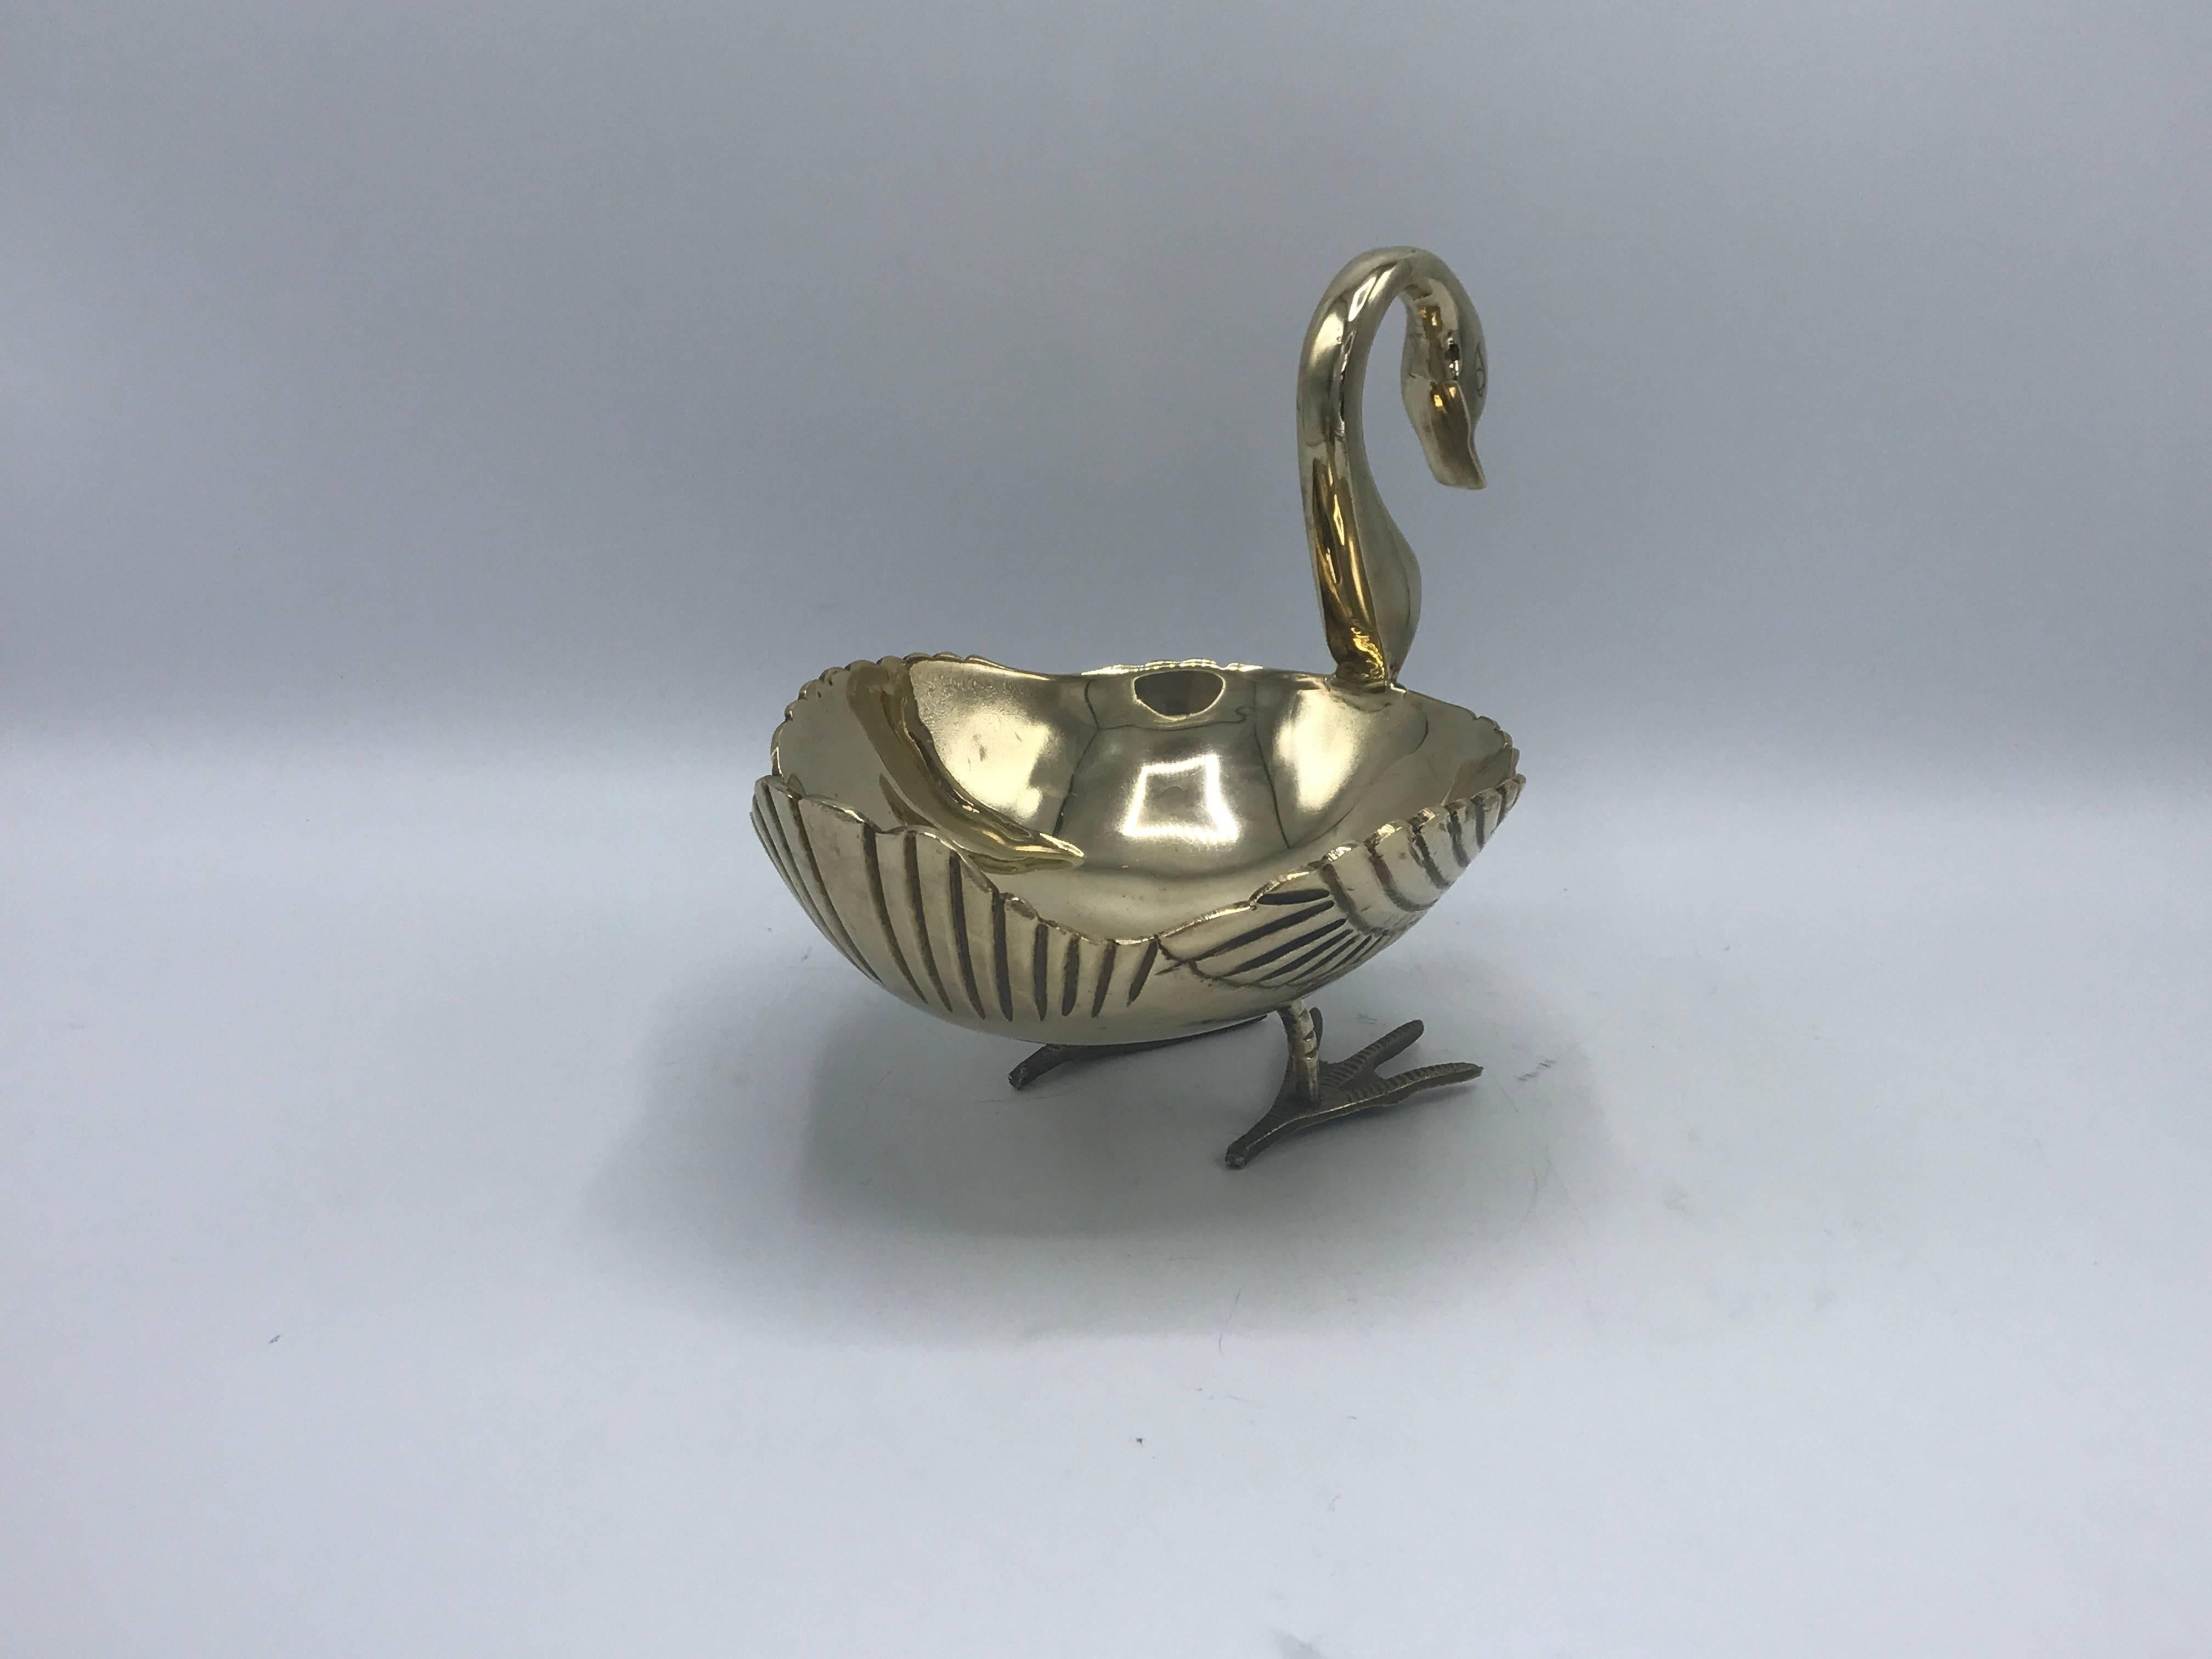 Offered is a gorgeous, 1970s Maison Jansen style brass swan sculpture catchall bowl.